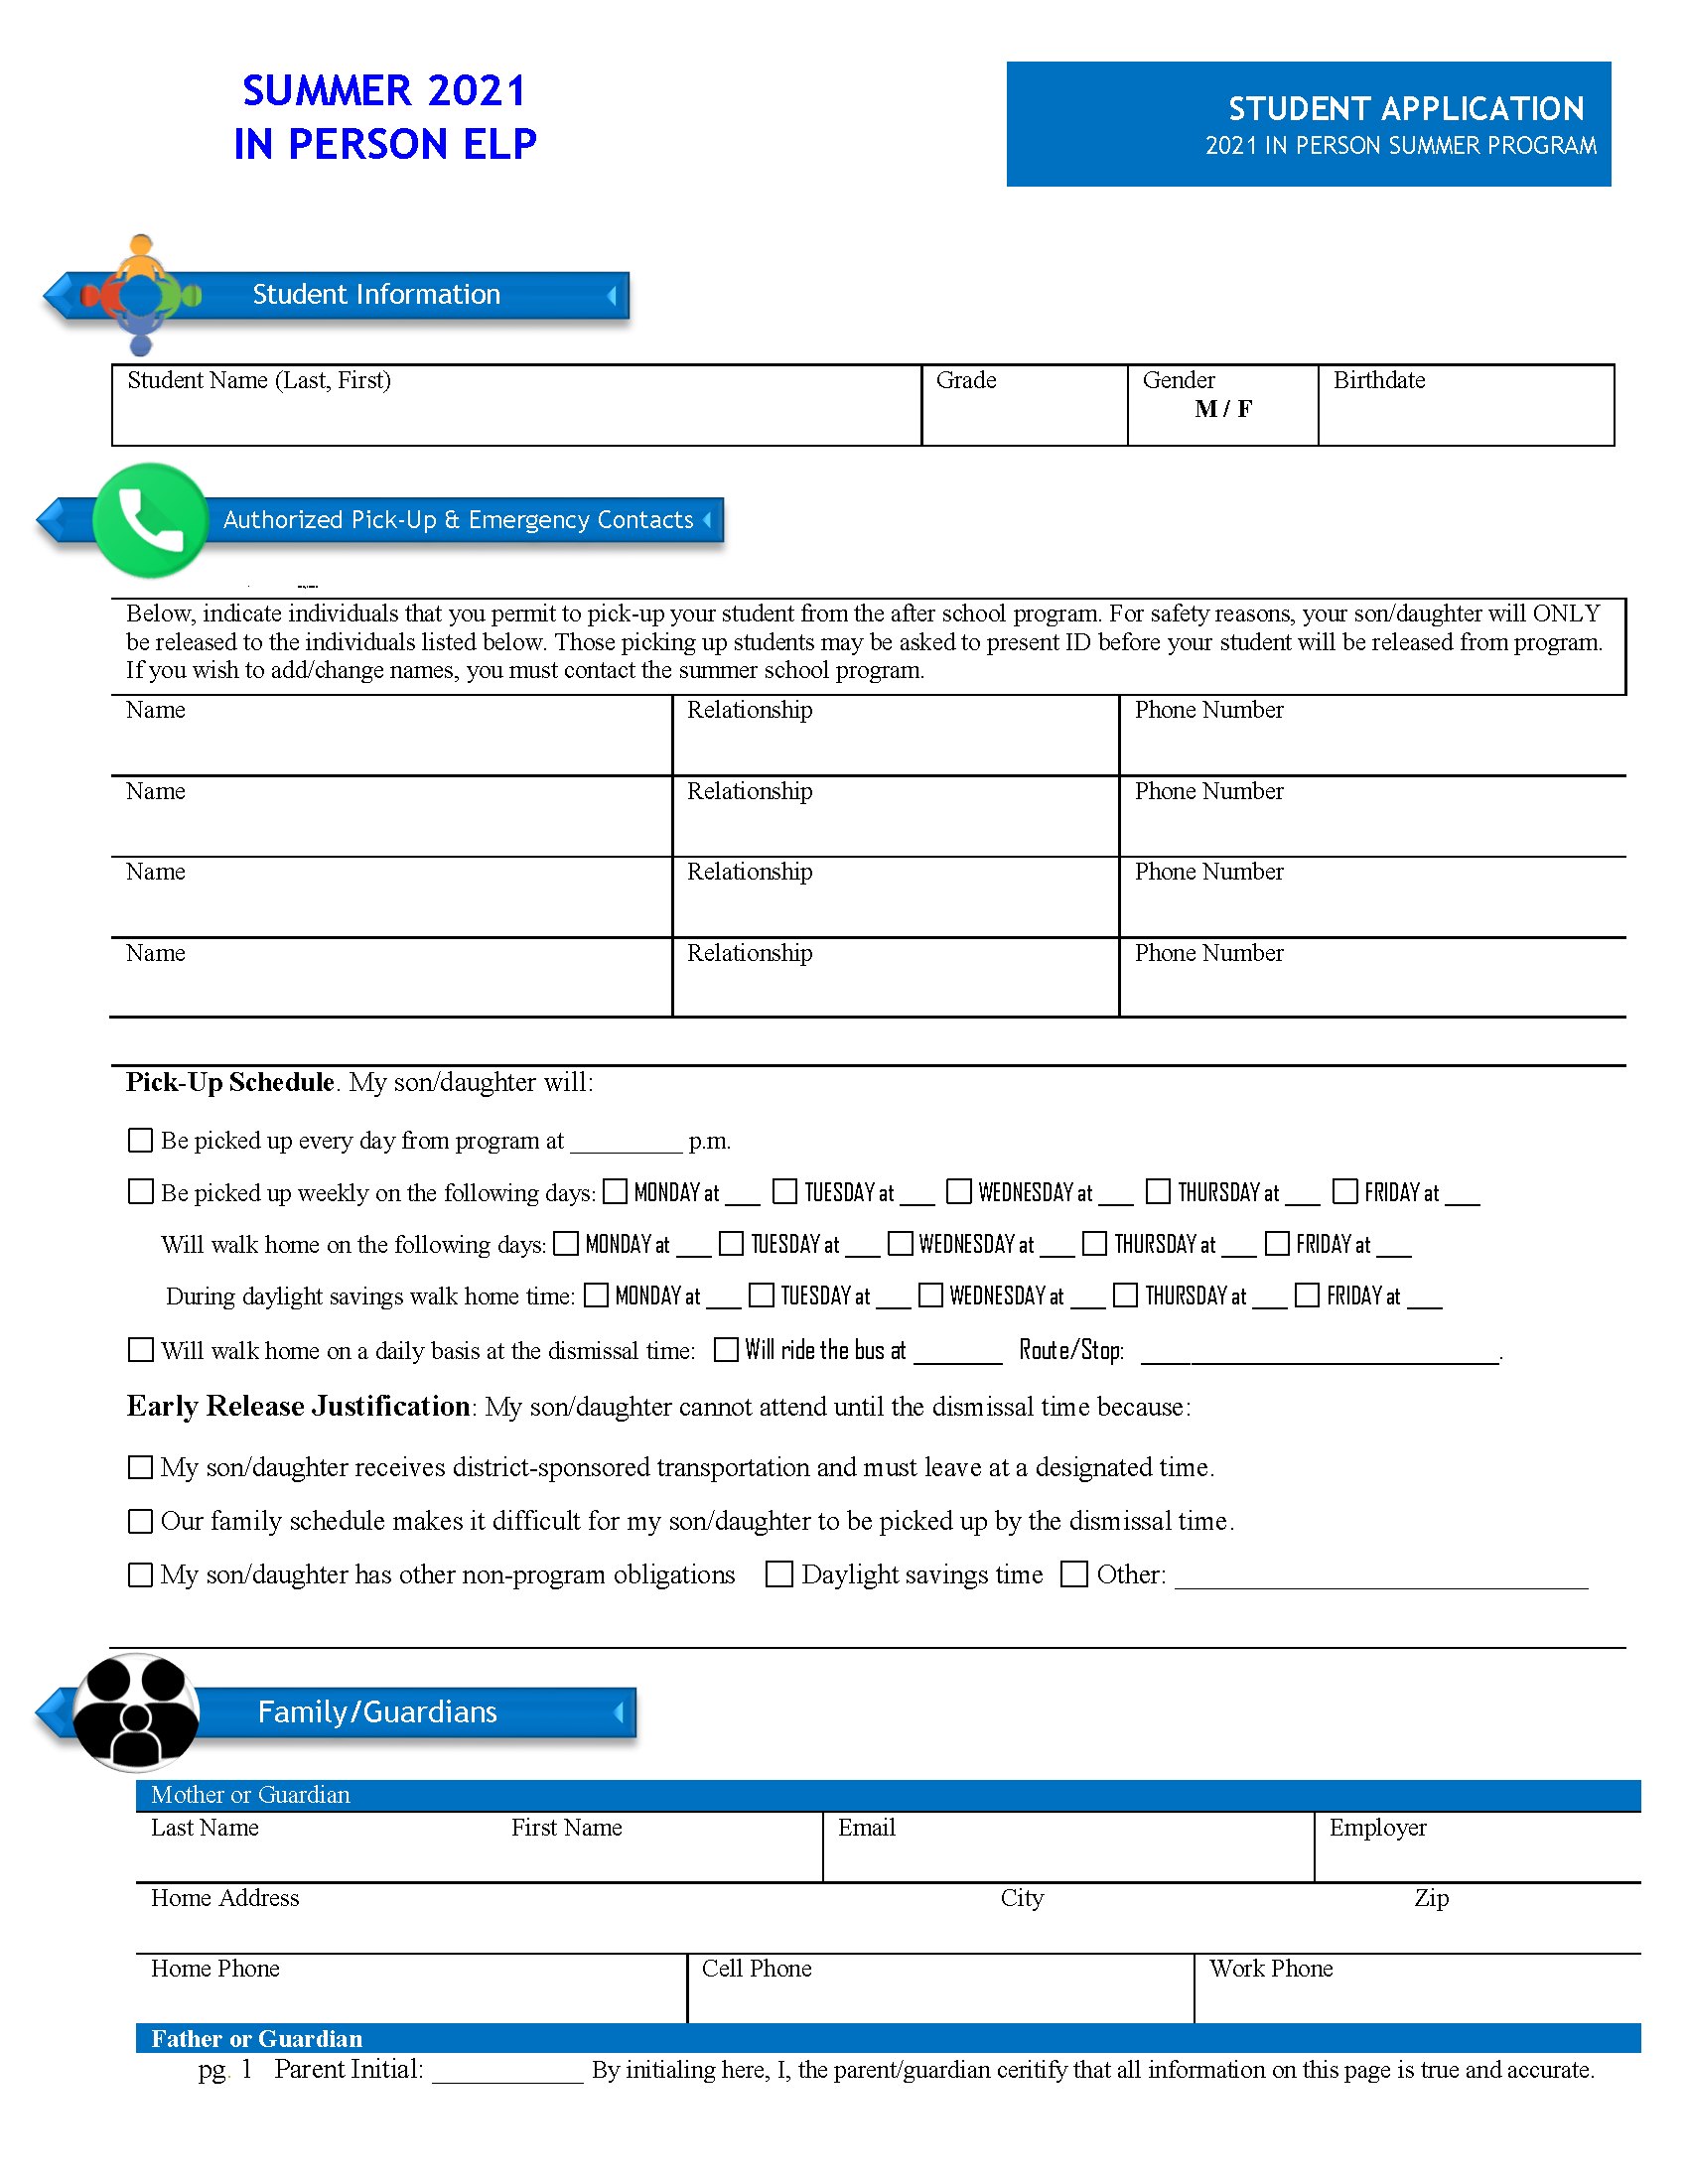 Application page 1